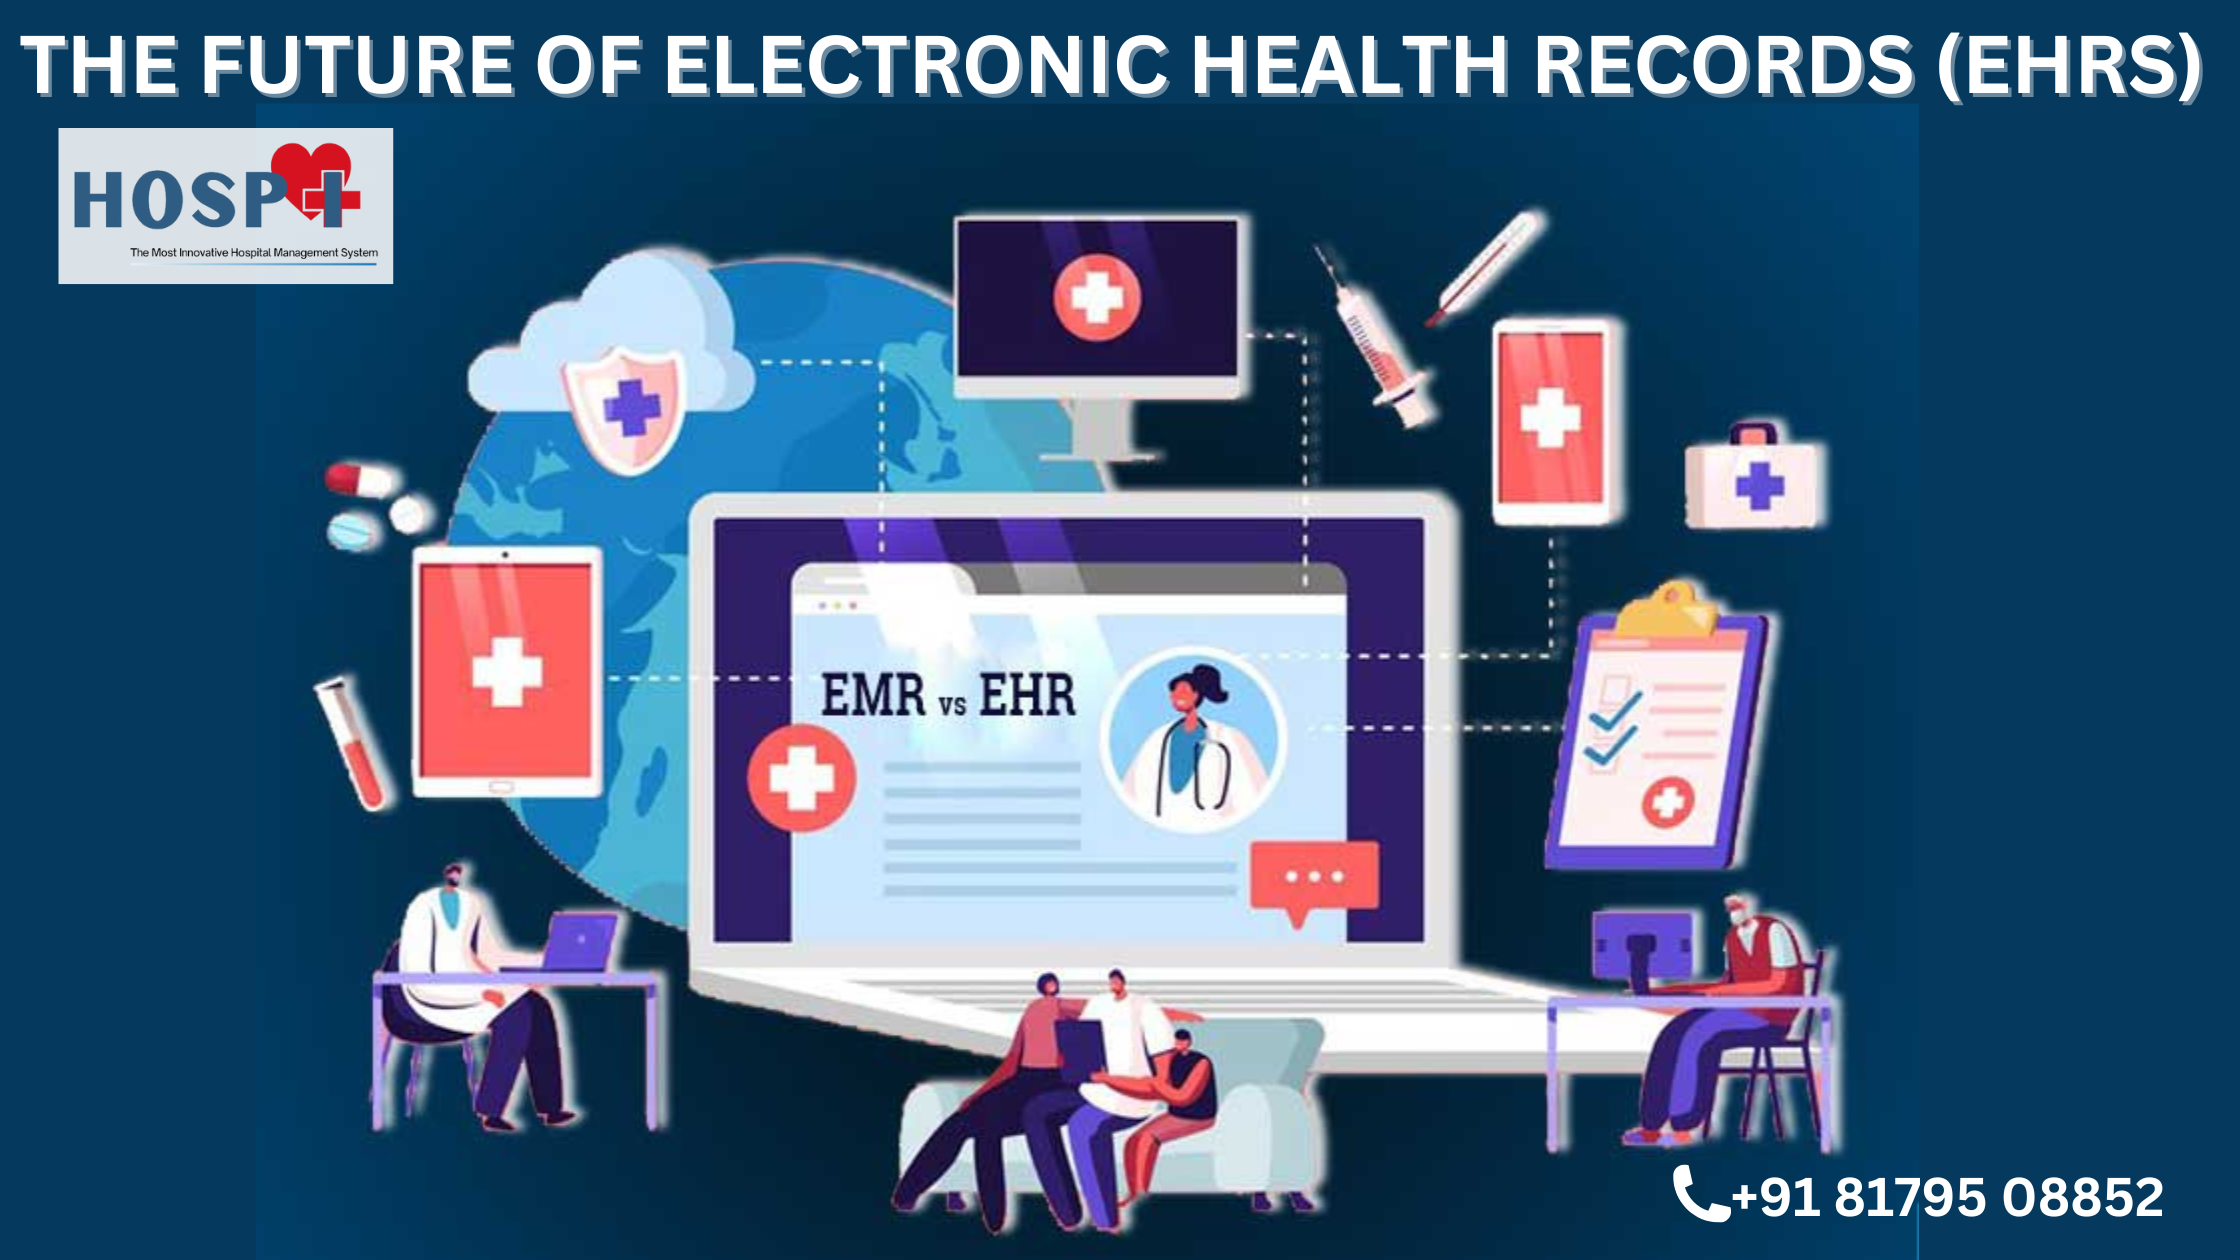 The Future of Electronic Health Records (EHRs)